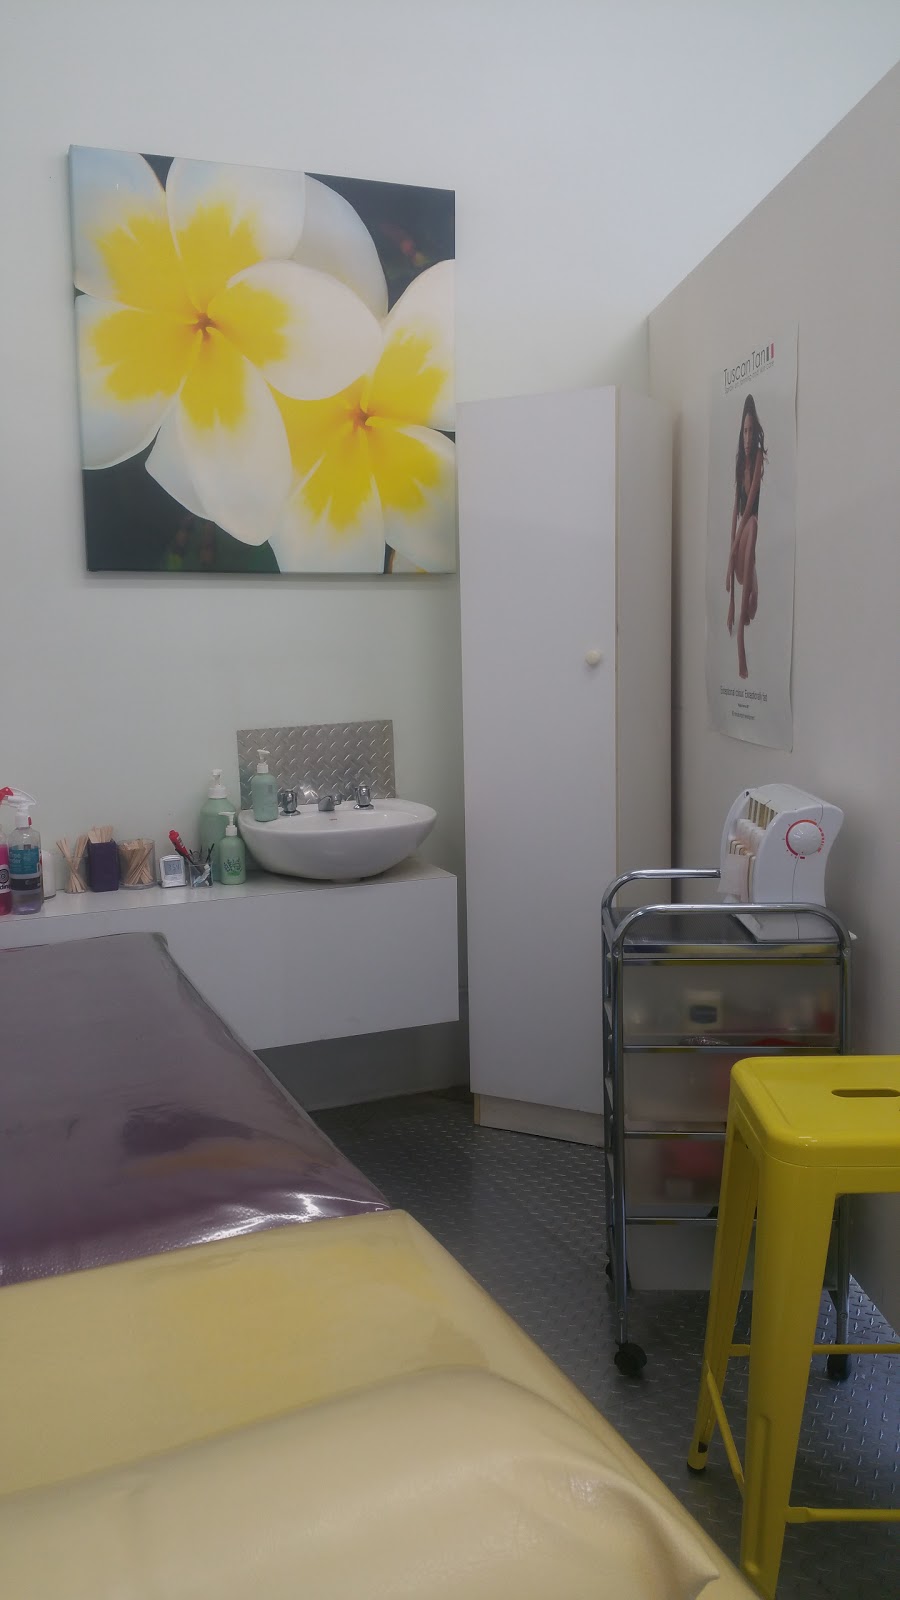 Bodysense Waxing and Tanning | hair care | 608 Balcombe Rd, Black Rock VIC 3193, Australia | 0395890645 OR +61 3 9589 0645